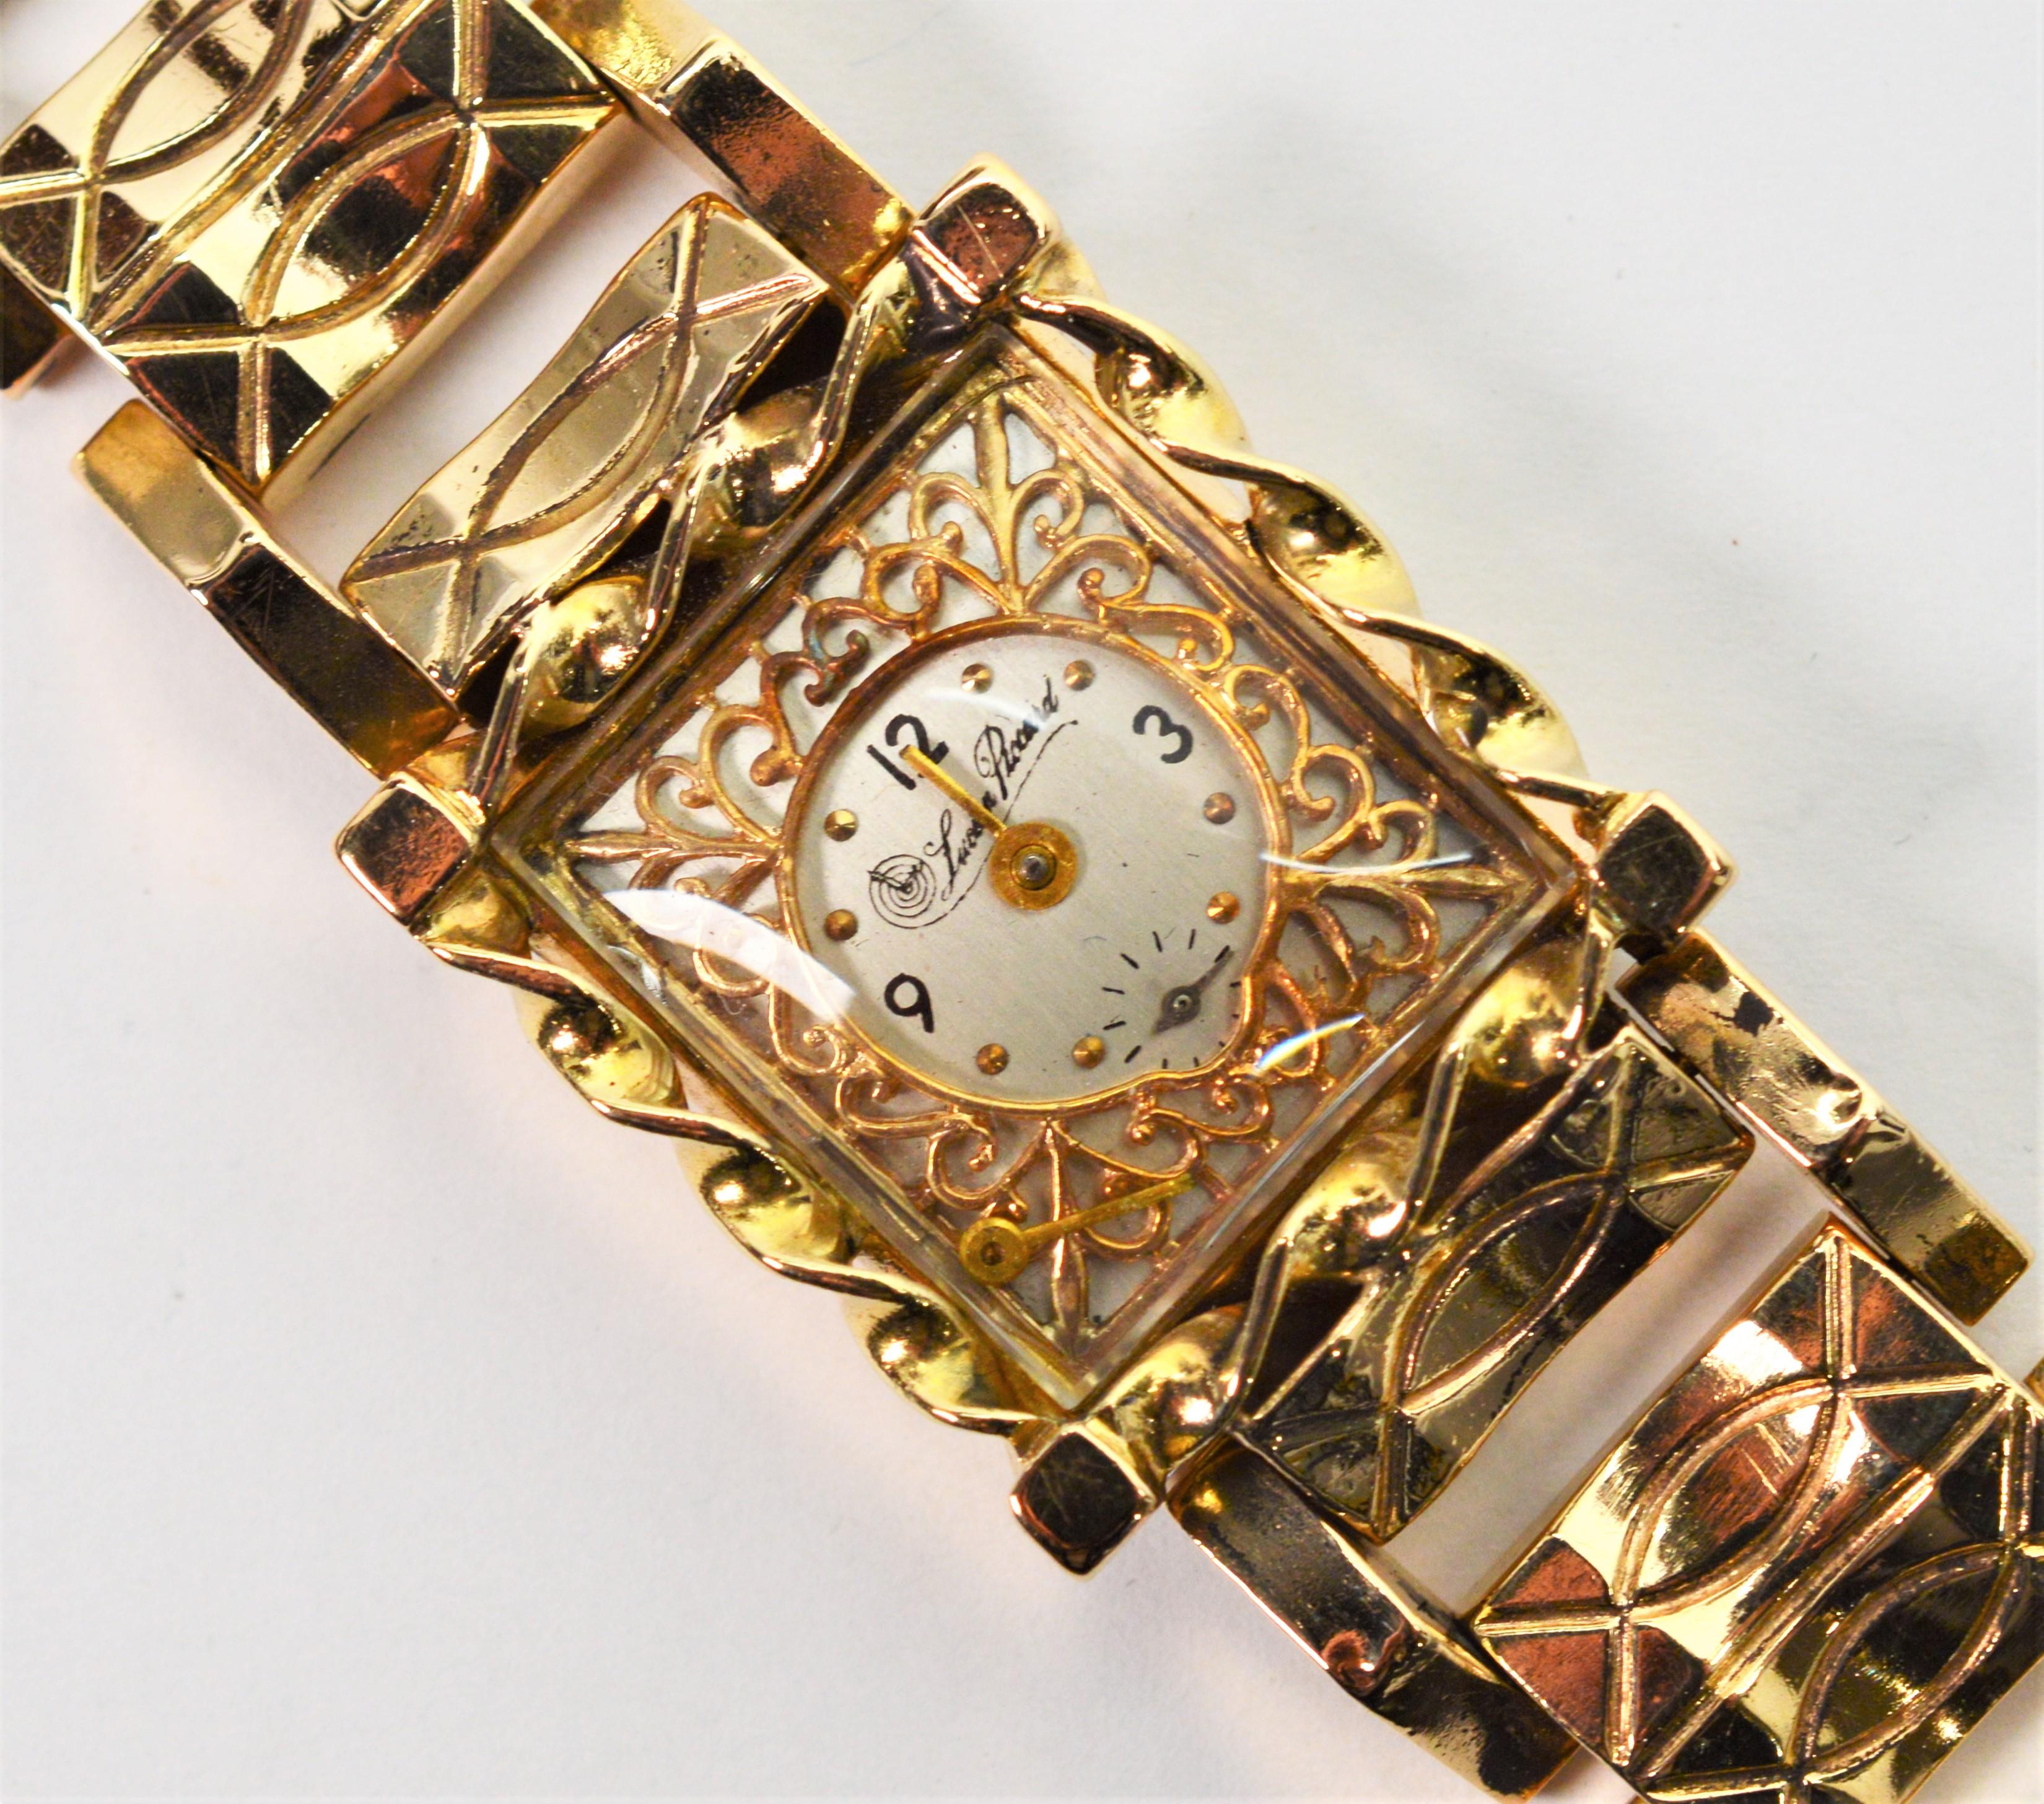 An exquisite heirloom circa late 1940's ladies dress bracelet wrist watch by Lucien Piccard.  This outstanding piece was designed by Paul Dilishein and has a unique fourteen karat 14K yellow gold fancy link bracelet that is simply stunning. The rich